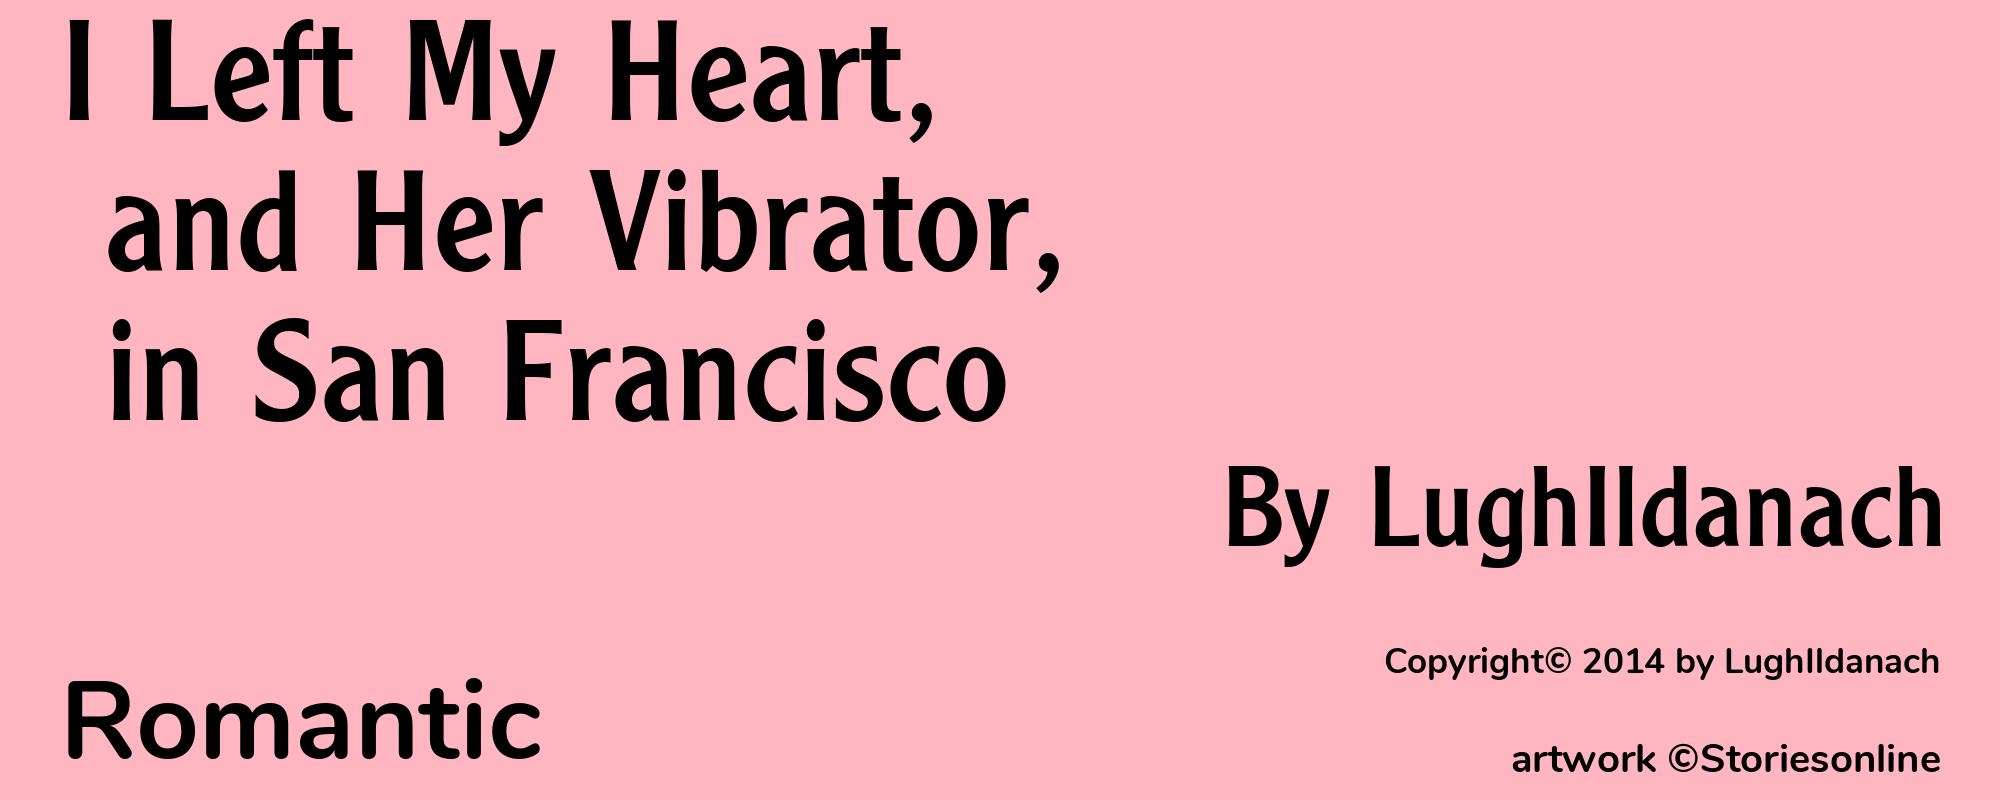 I Left My Heart, and Her Vibrator, in San Francisco - Cover